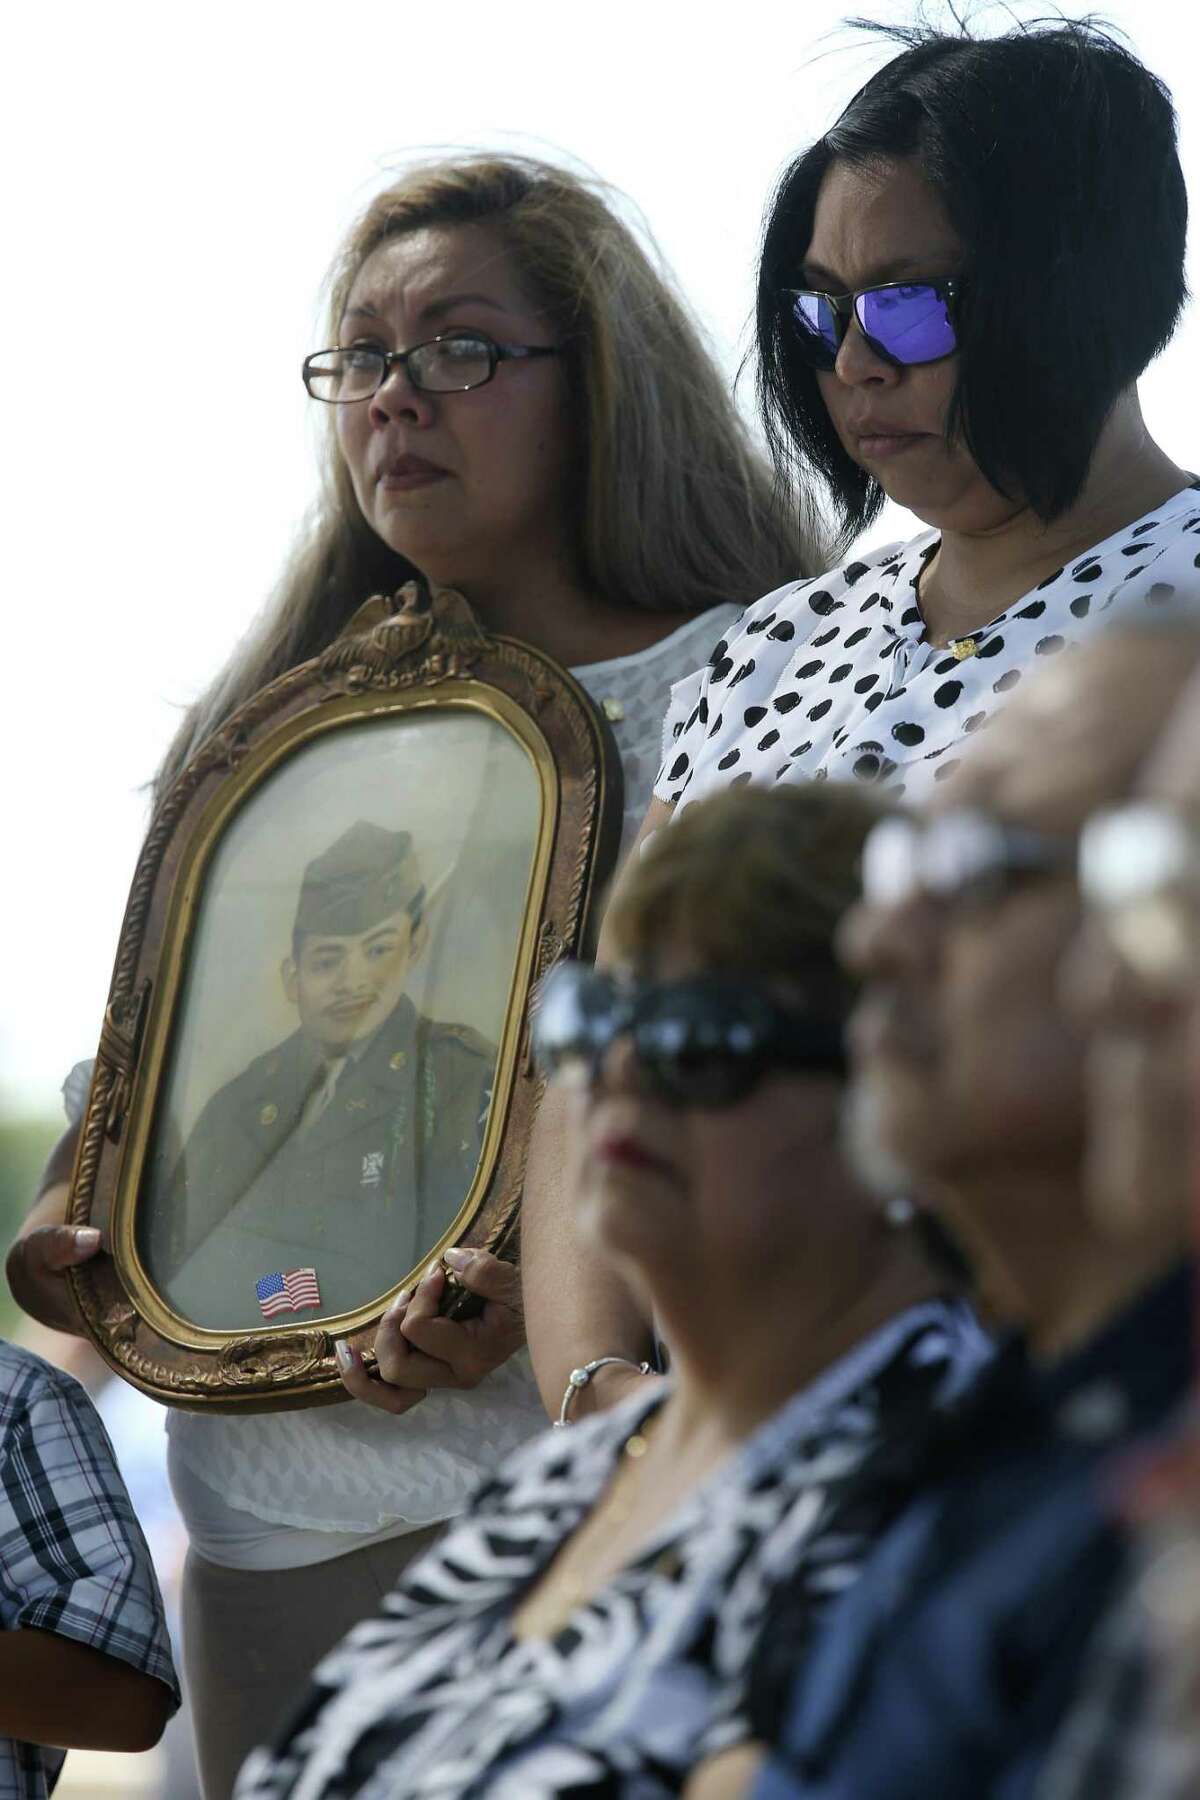 Melanie Sandoval Dacosta holds a portrait of her grandfather, U.S. Army Cpl. Frank Luna Sandoval, during his burial ceremony at Fort Sam Houston National Cemetery, Tuesday, July 11, 2017. Sandoval was missing action and presumed dead since the Korean War. Sandoval was 20-years-old when he was take as a prisoner of war and died of malnutrition. Sandoval was reported missing in action on Feb. 13, 1951 and declared dead over two and a half years later. He body was returned to U.S. custody in 1954 and he was buried as an unknown soldier in Hawaii for decades. The family was notified of his identification early this year.